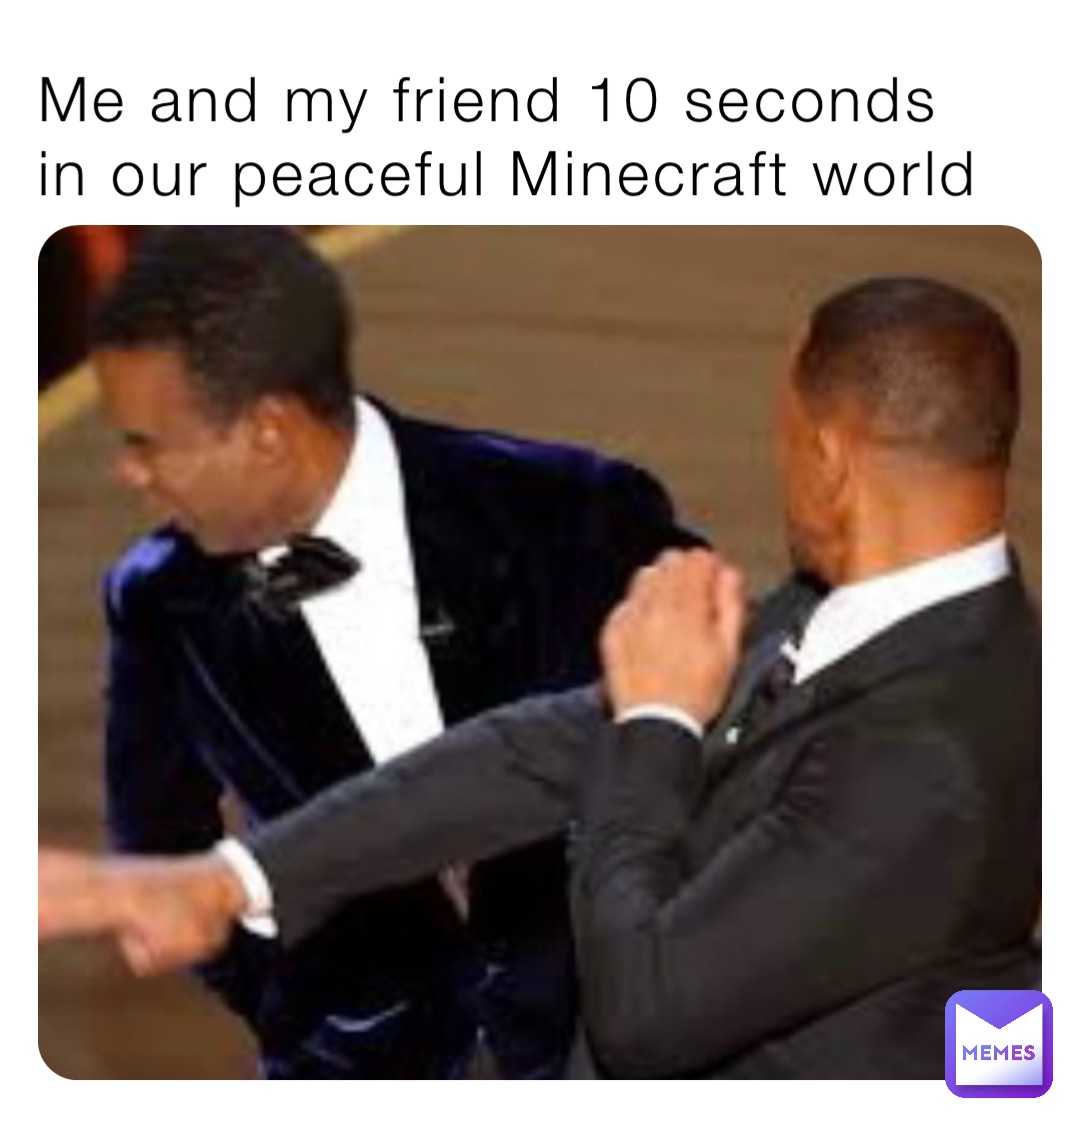 Me and my friend 10 seconds in our peaceful Minecraft world